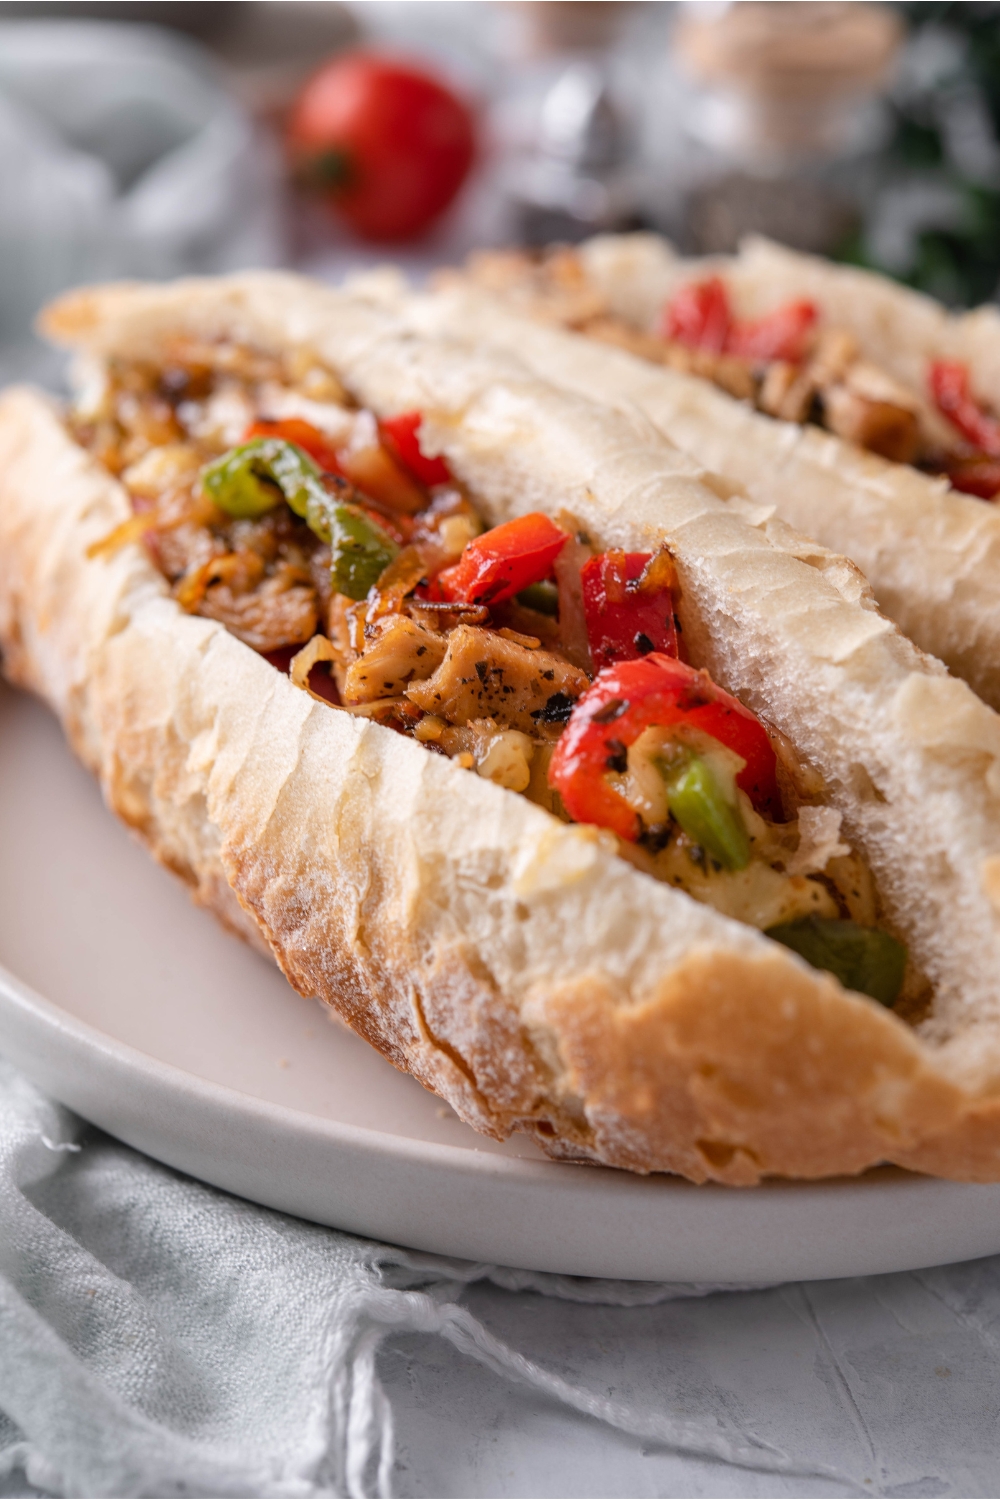 Close up of a hoagie roll sliced in half and stuffed with sautéed peppers, onions, and shredded chicken.